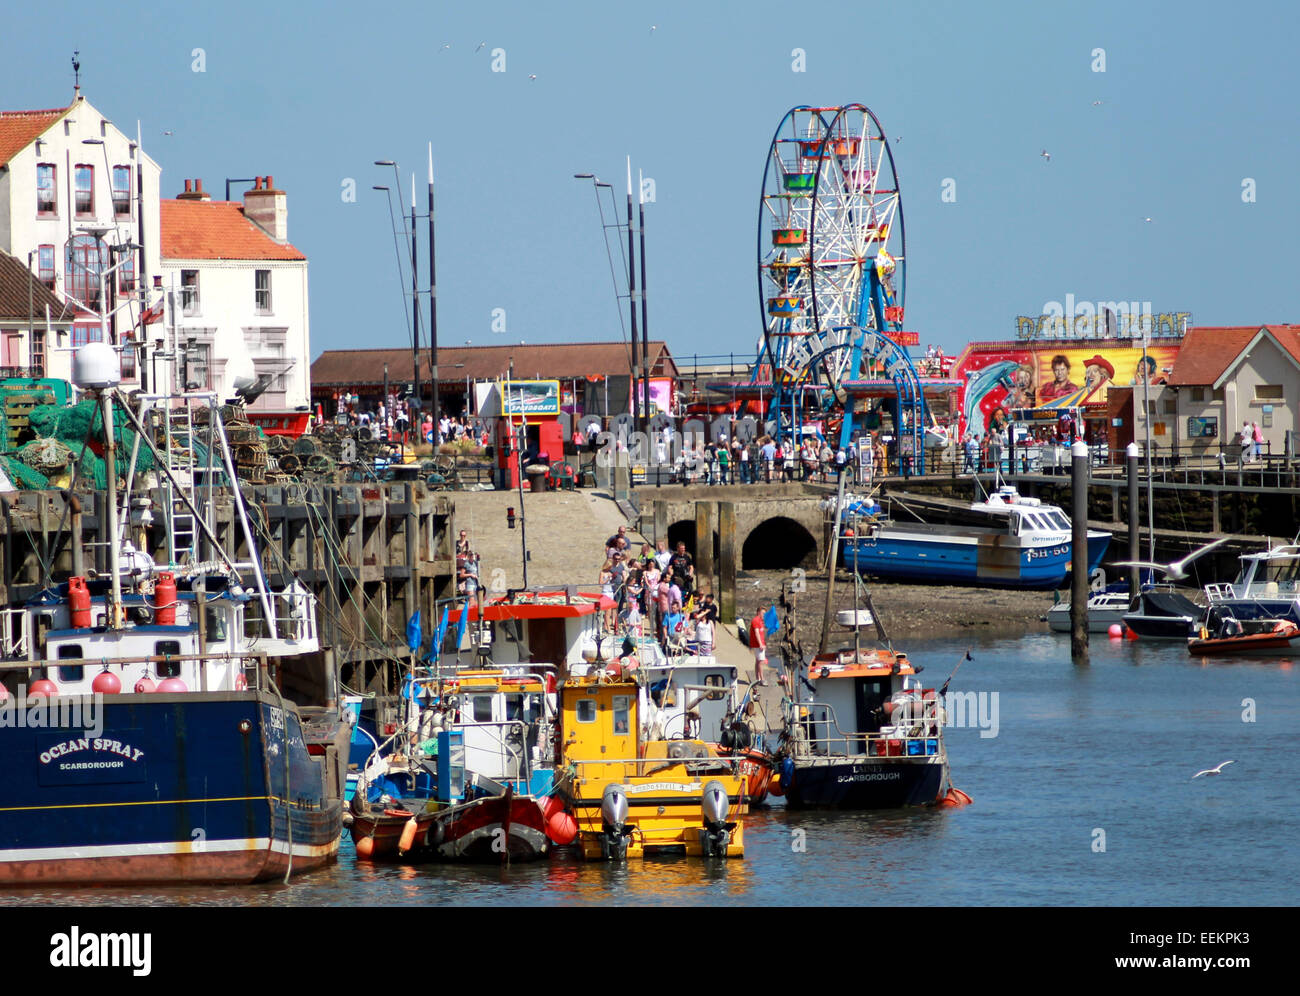 SCARBOROUGH, NORTH YORKSHIRE, ENGLAND - 19th May 2014: Scarborough harbor on the 19th of May 2014. This is a popular tourist des Stock Photo